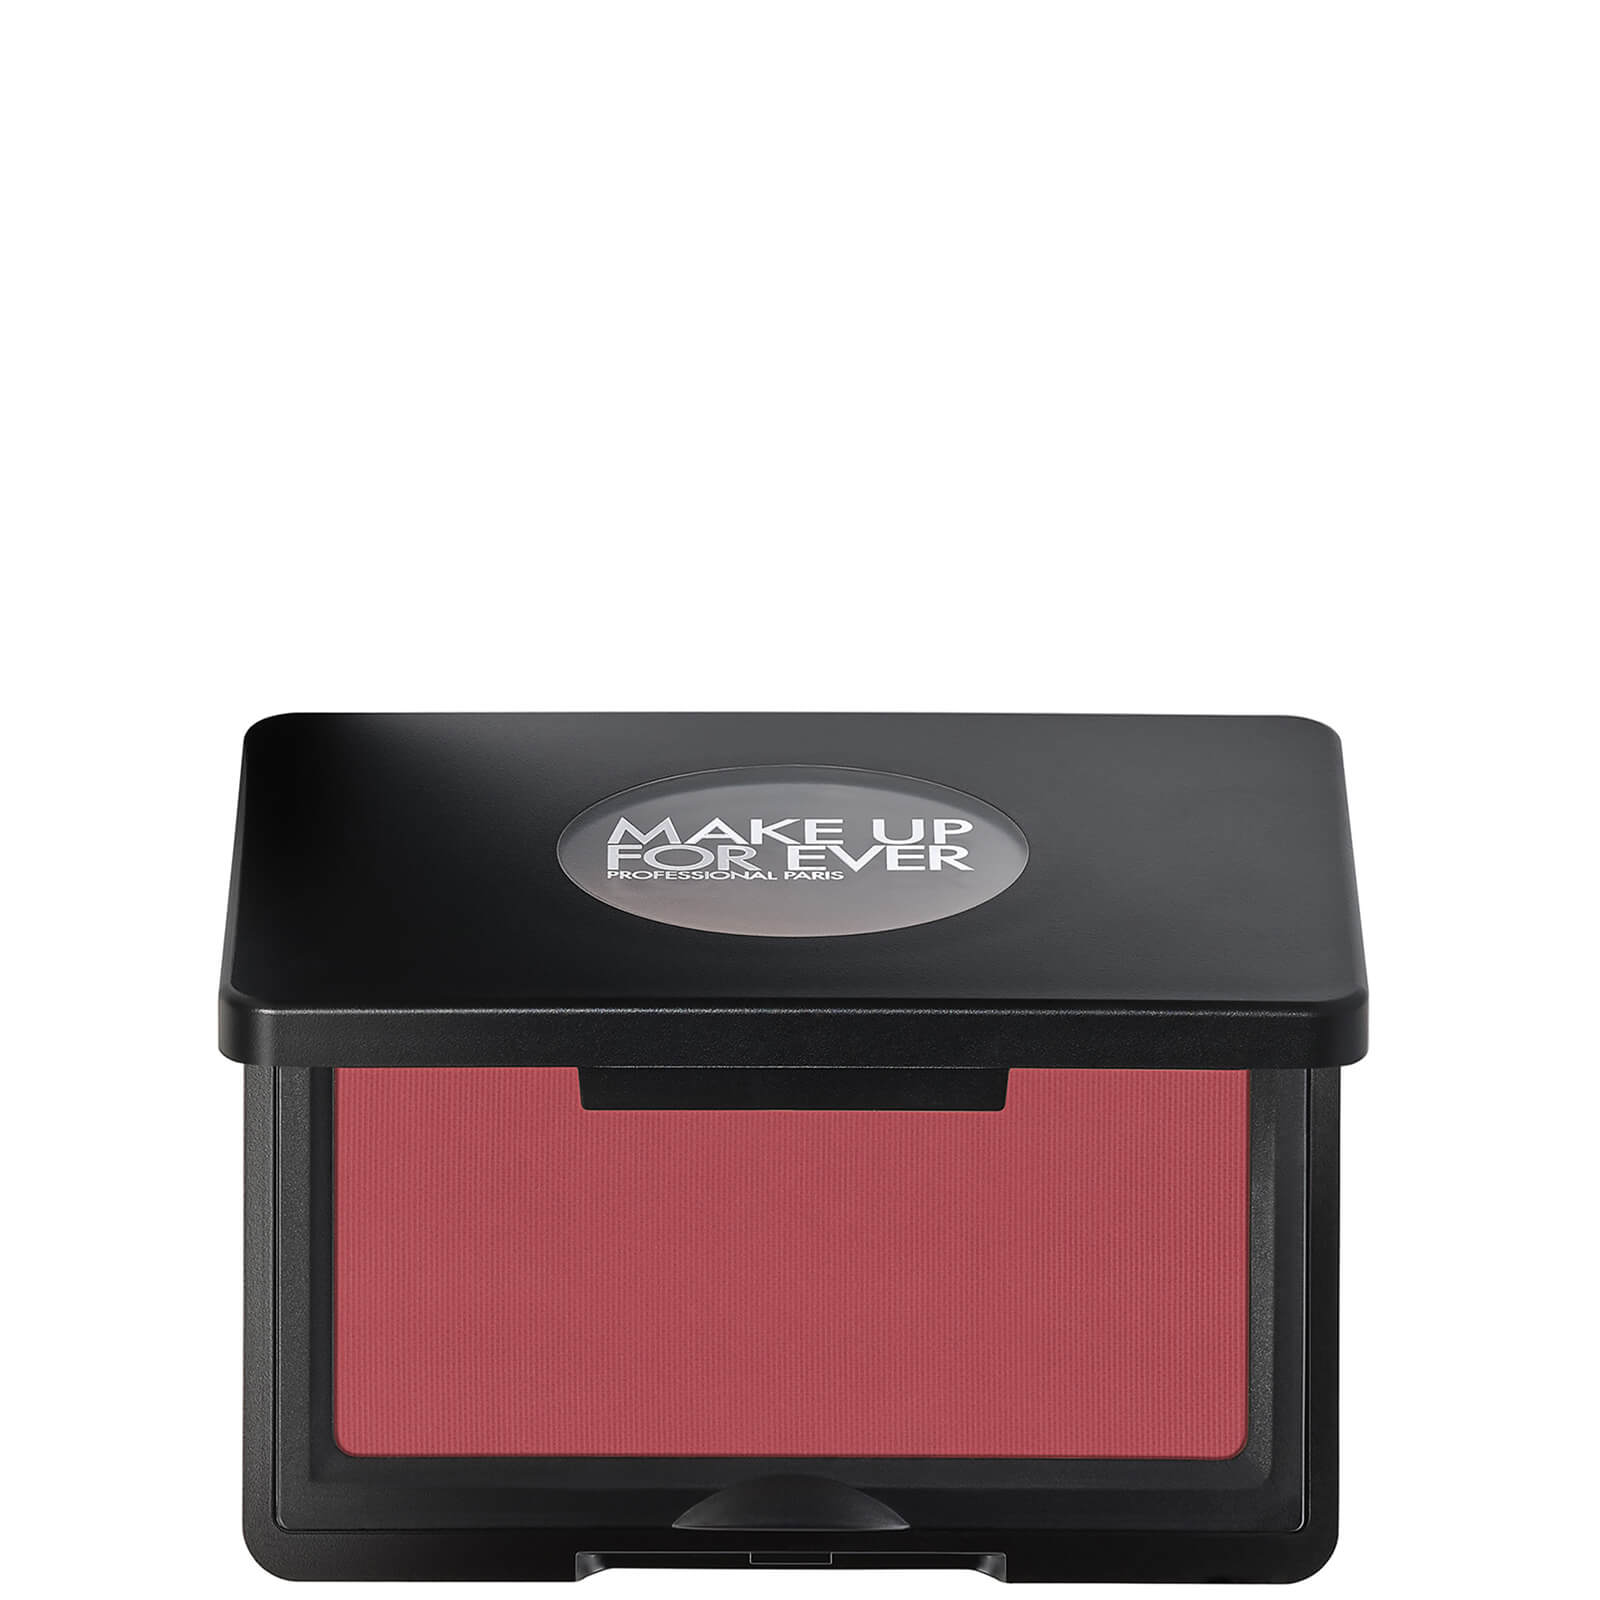 MAKE UP FOR EVER Artist Face Powders Blush 4g (Various Shades) - B260 - Limitless Berry